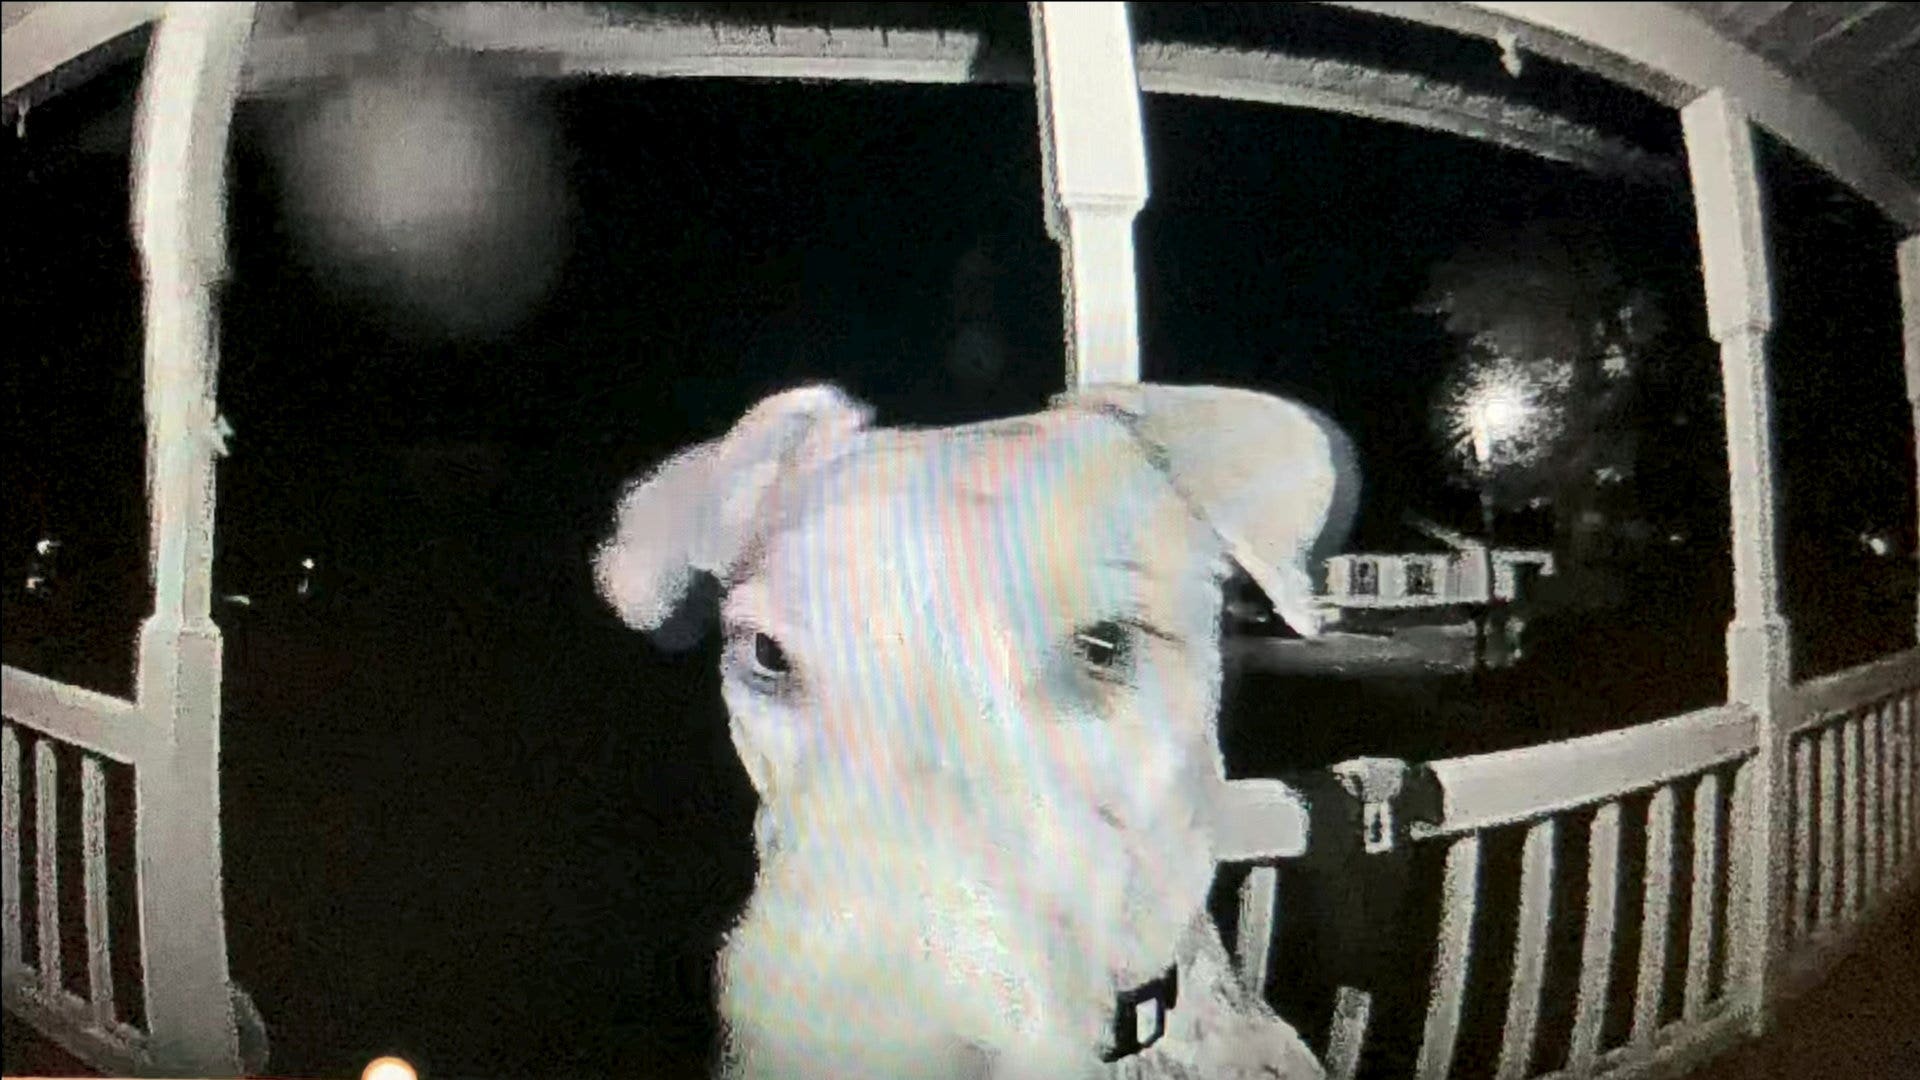 Missing pet dog returns home in the middle of the night and presses family's doorbell